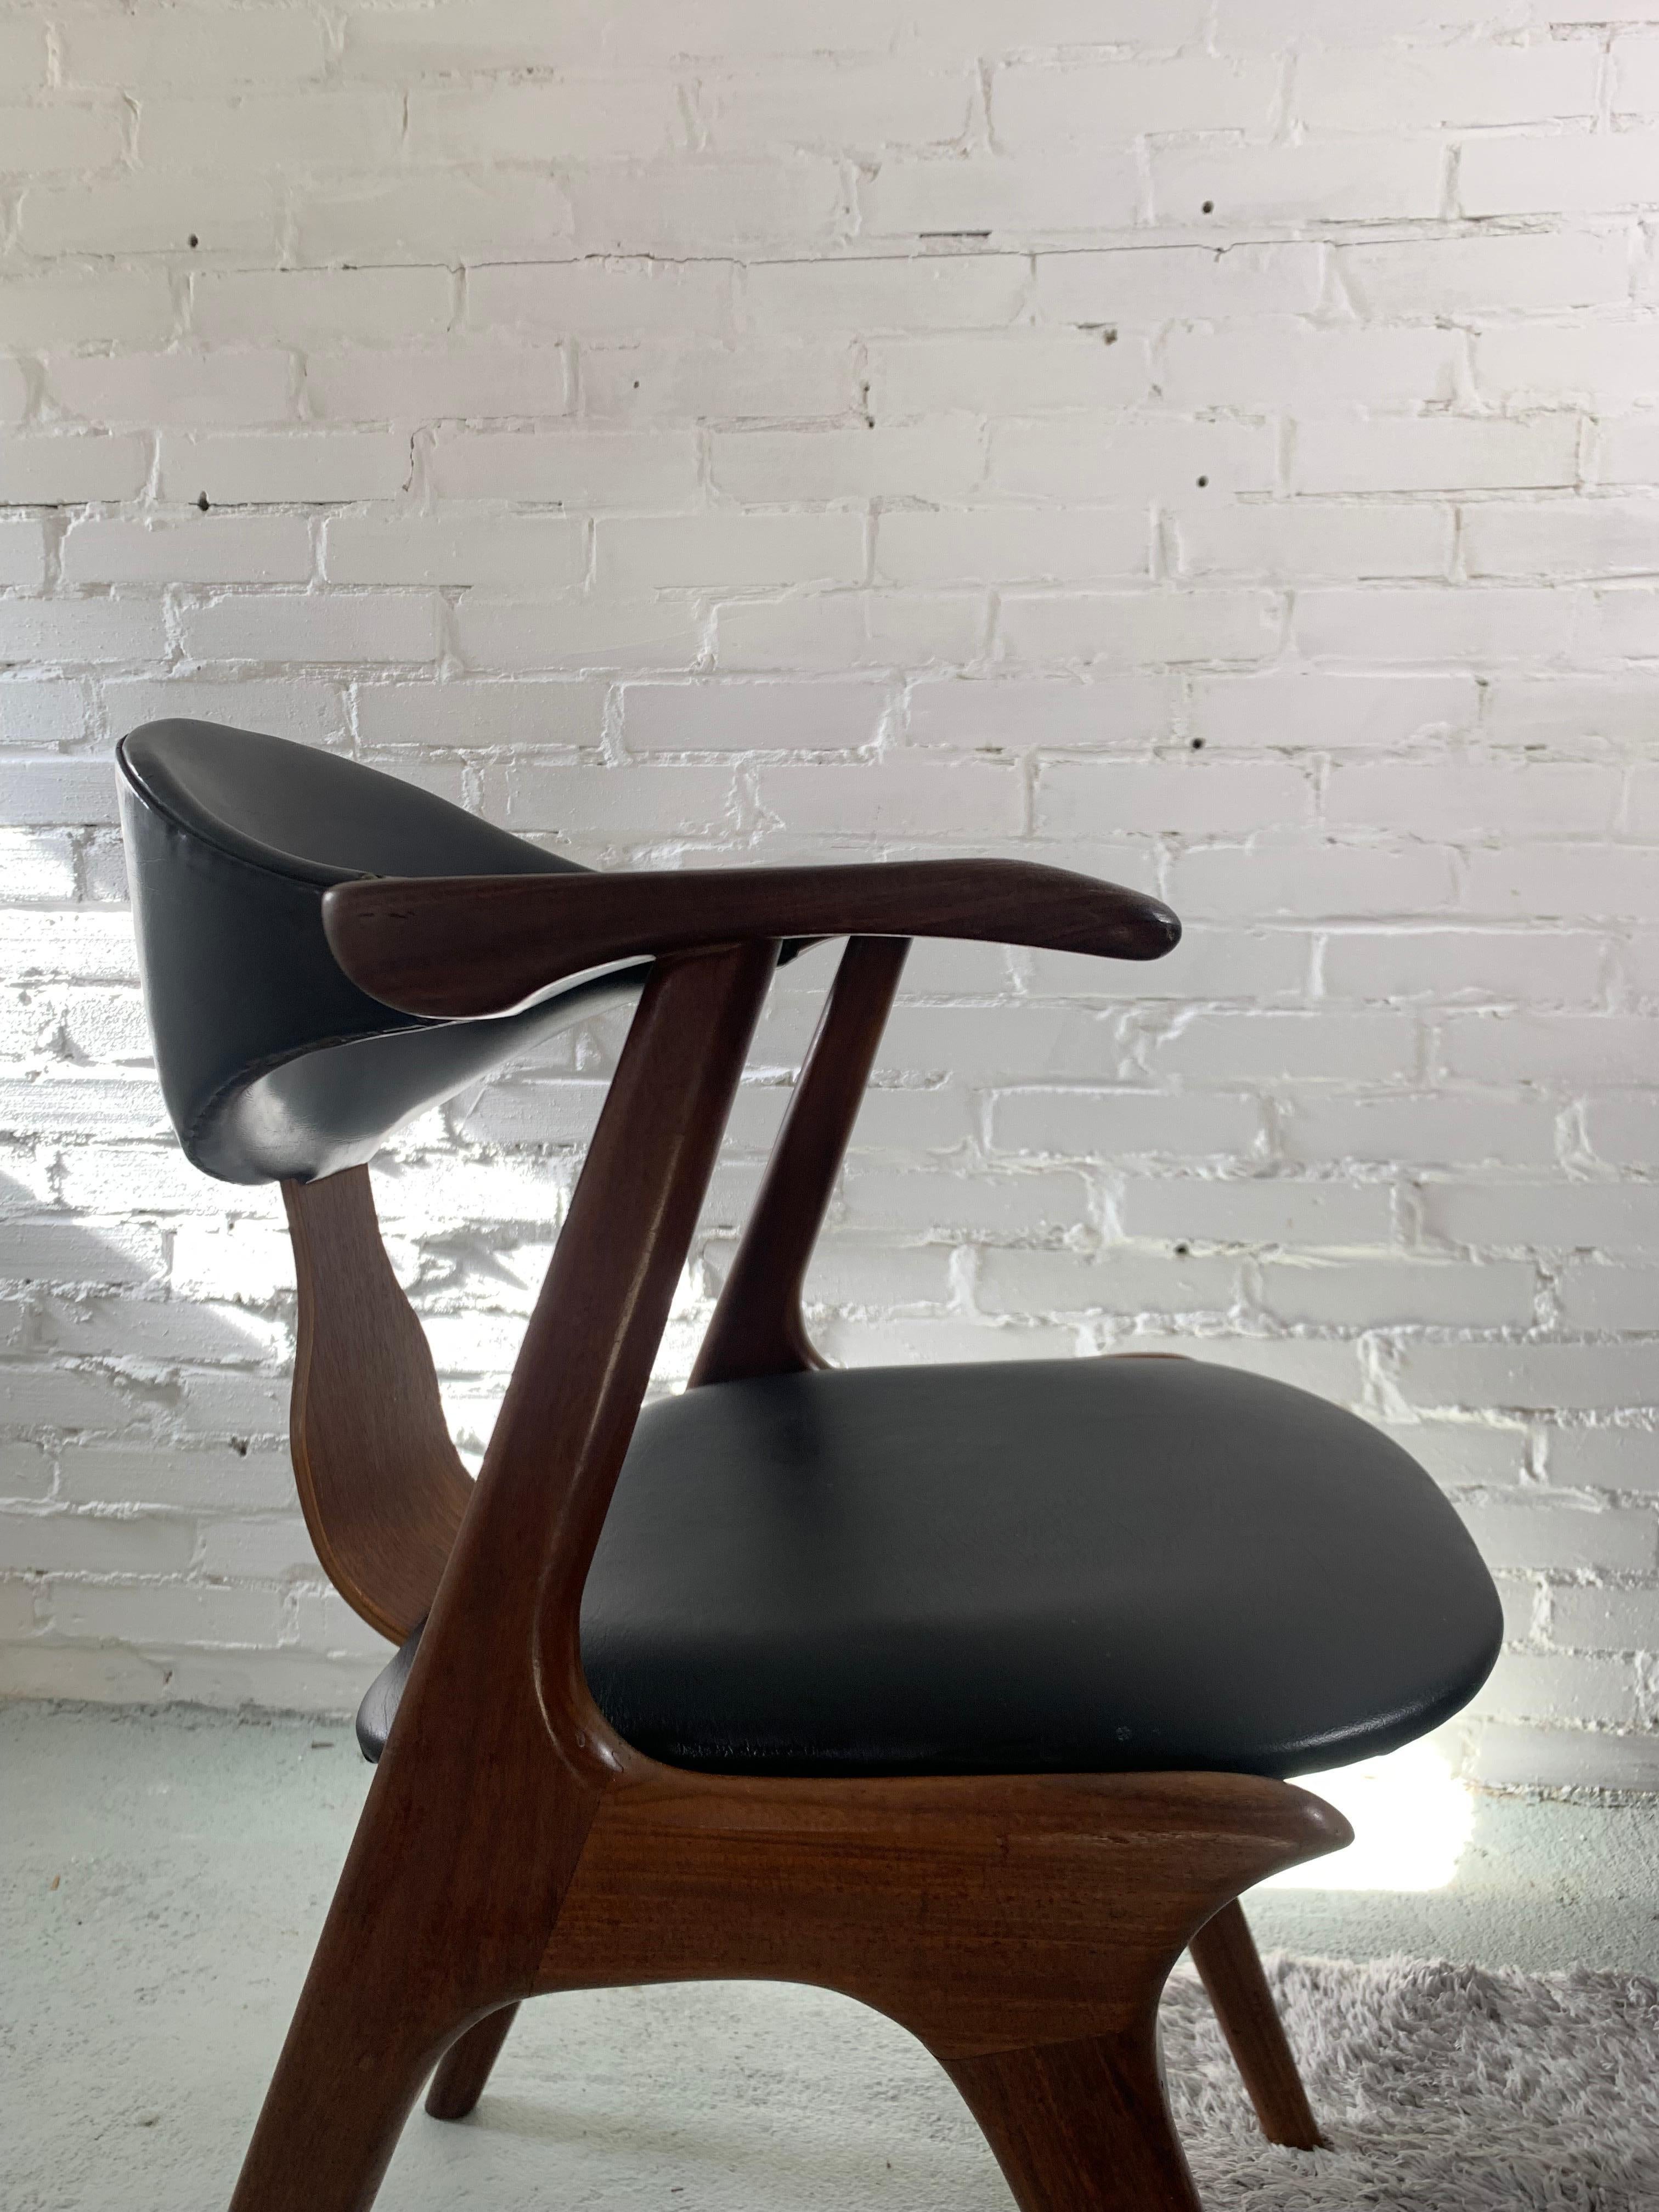 Vintage Cow Horn Chair by Louis Van Teeffelen For AWA, 1950s 1